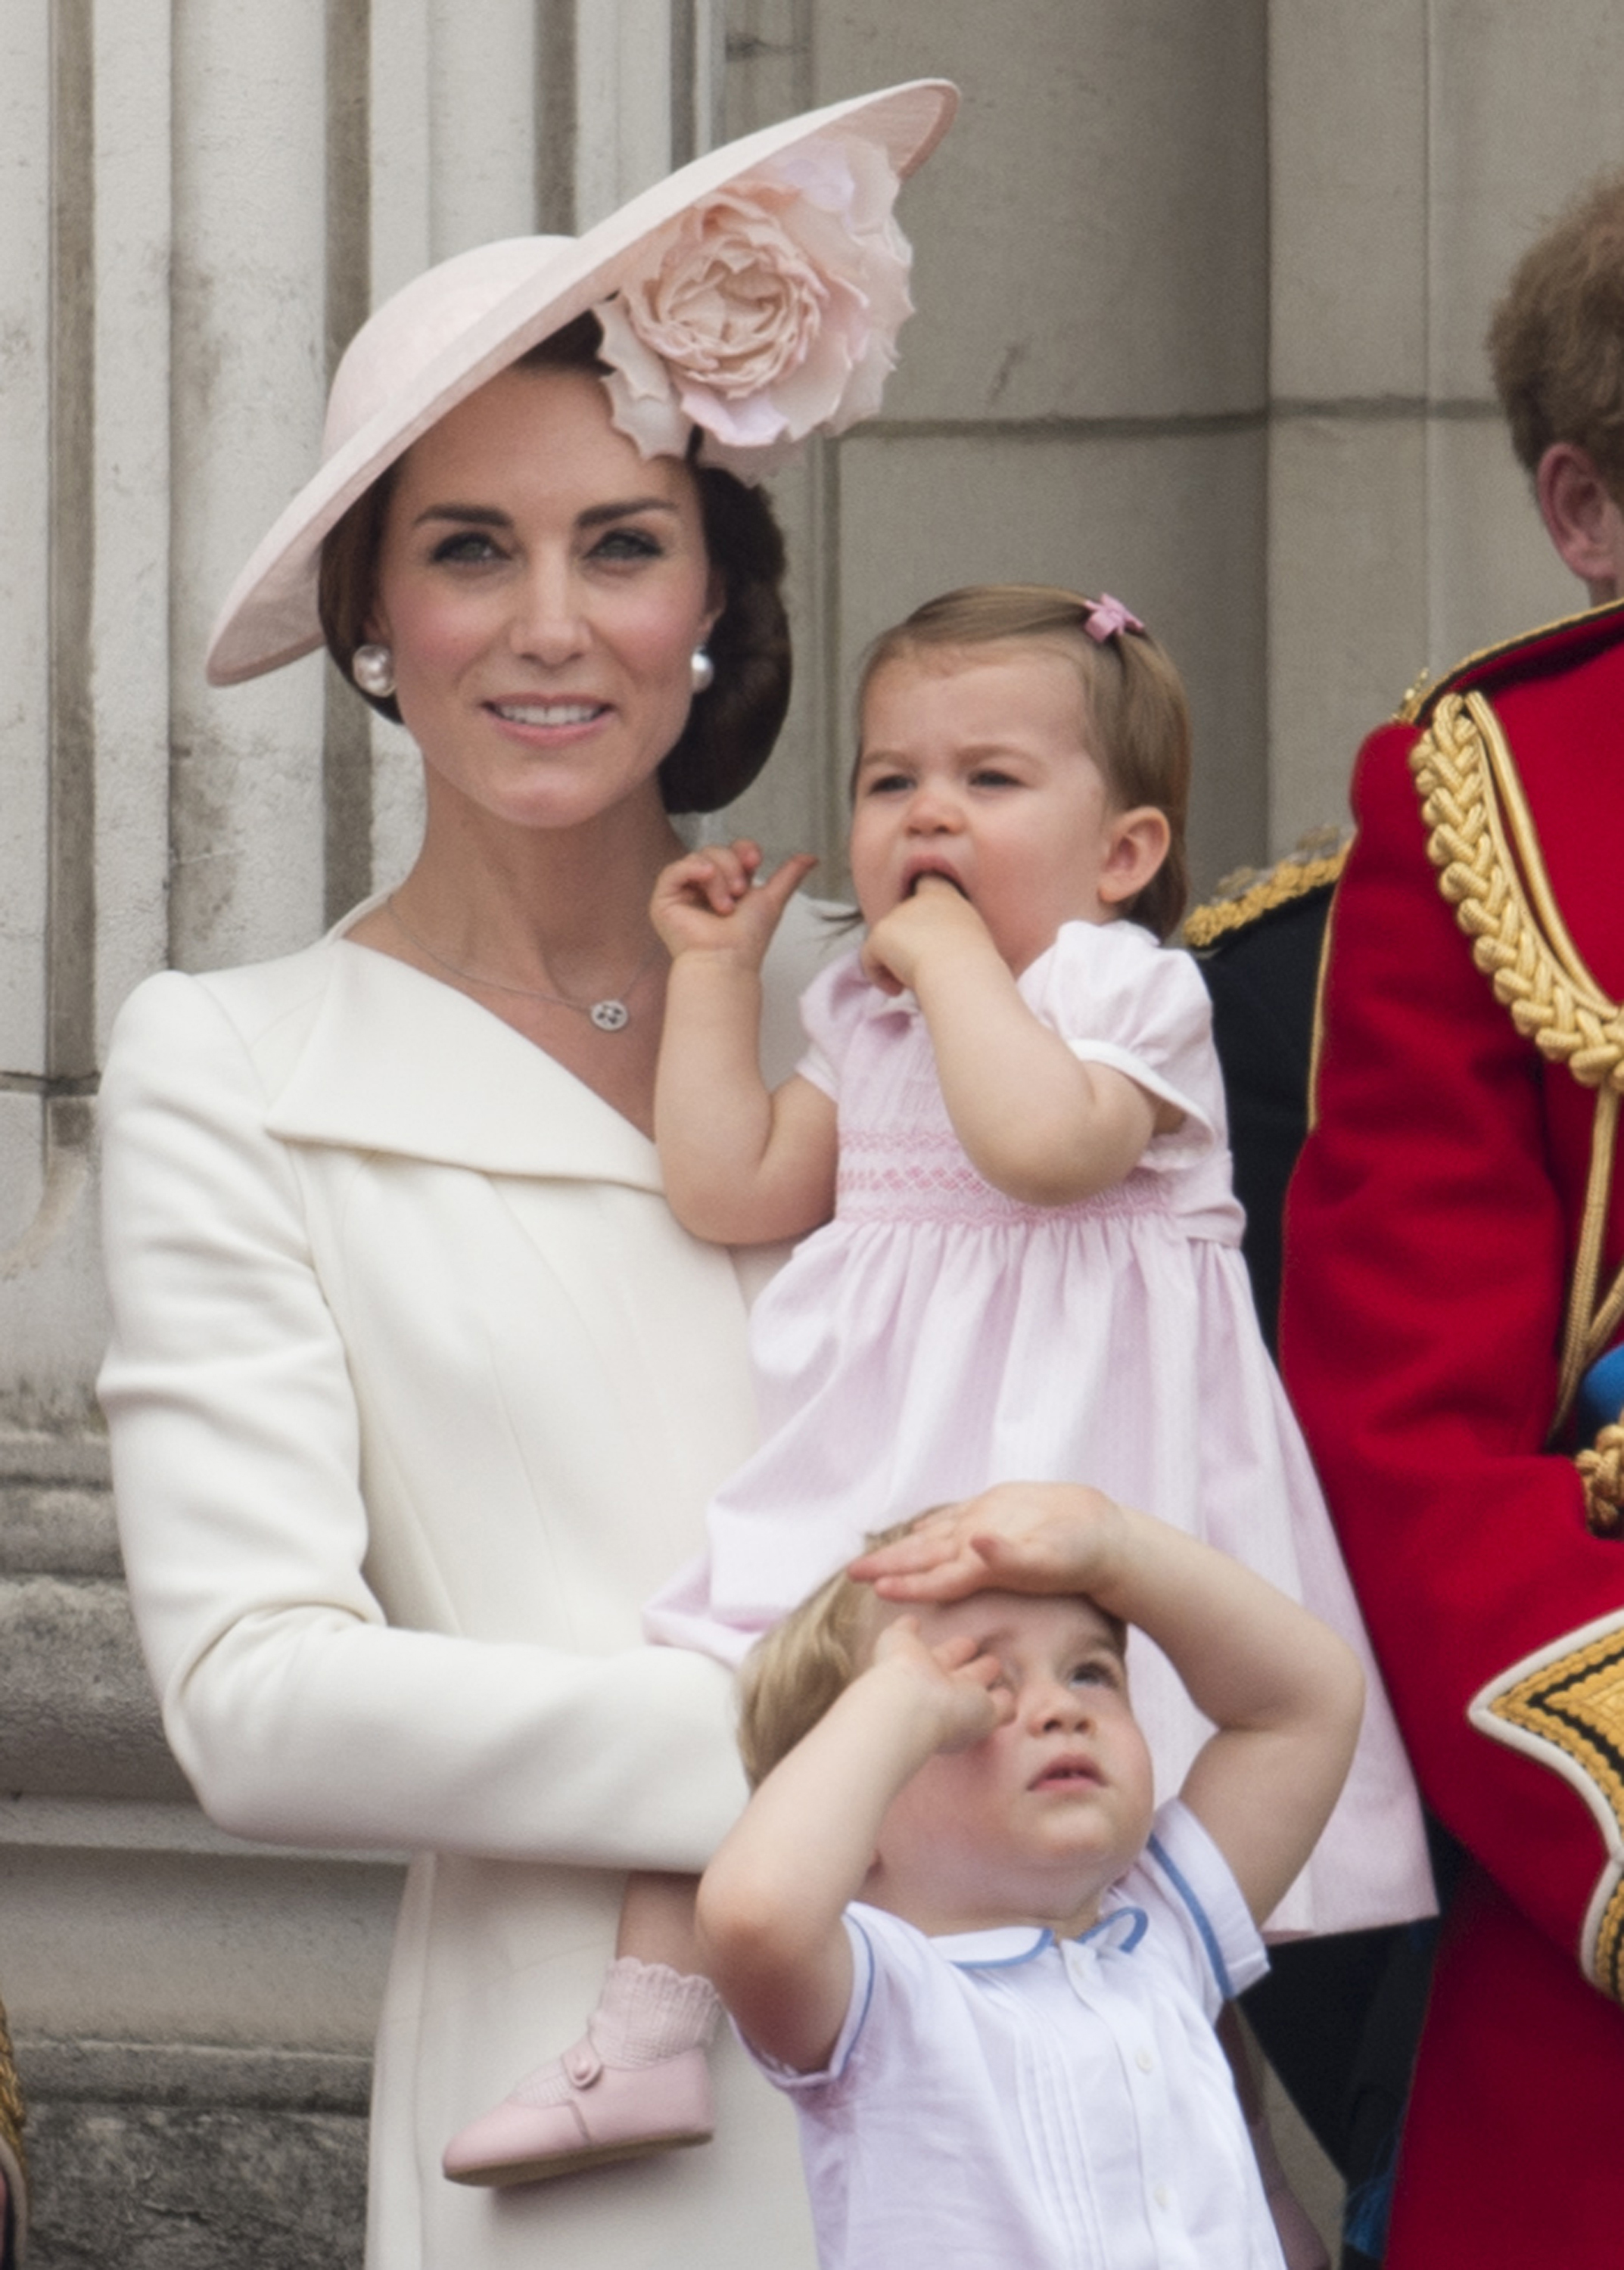 Catherine, Duchess of Cambridge with Princess Charlotte of Cambridge and Prince George of Cambridge during the Trooping the Colour, this year marking the Queen's 90th birthday at The Mall in London on June 11, 2016.